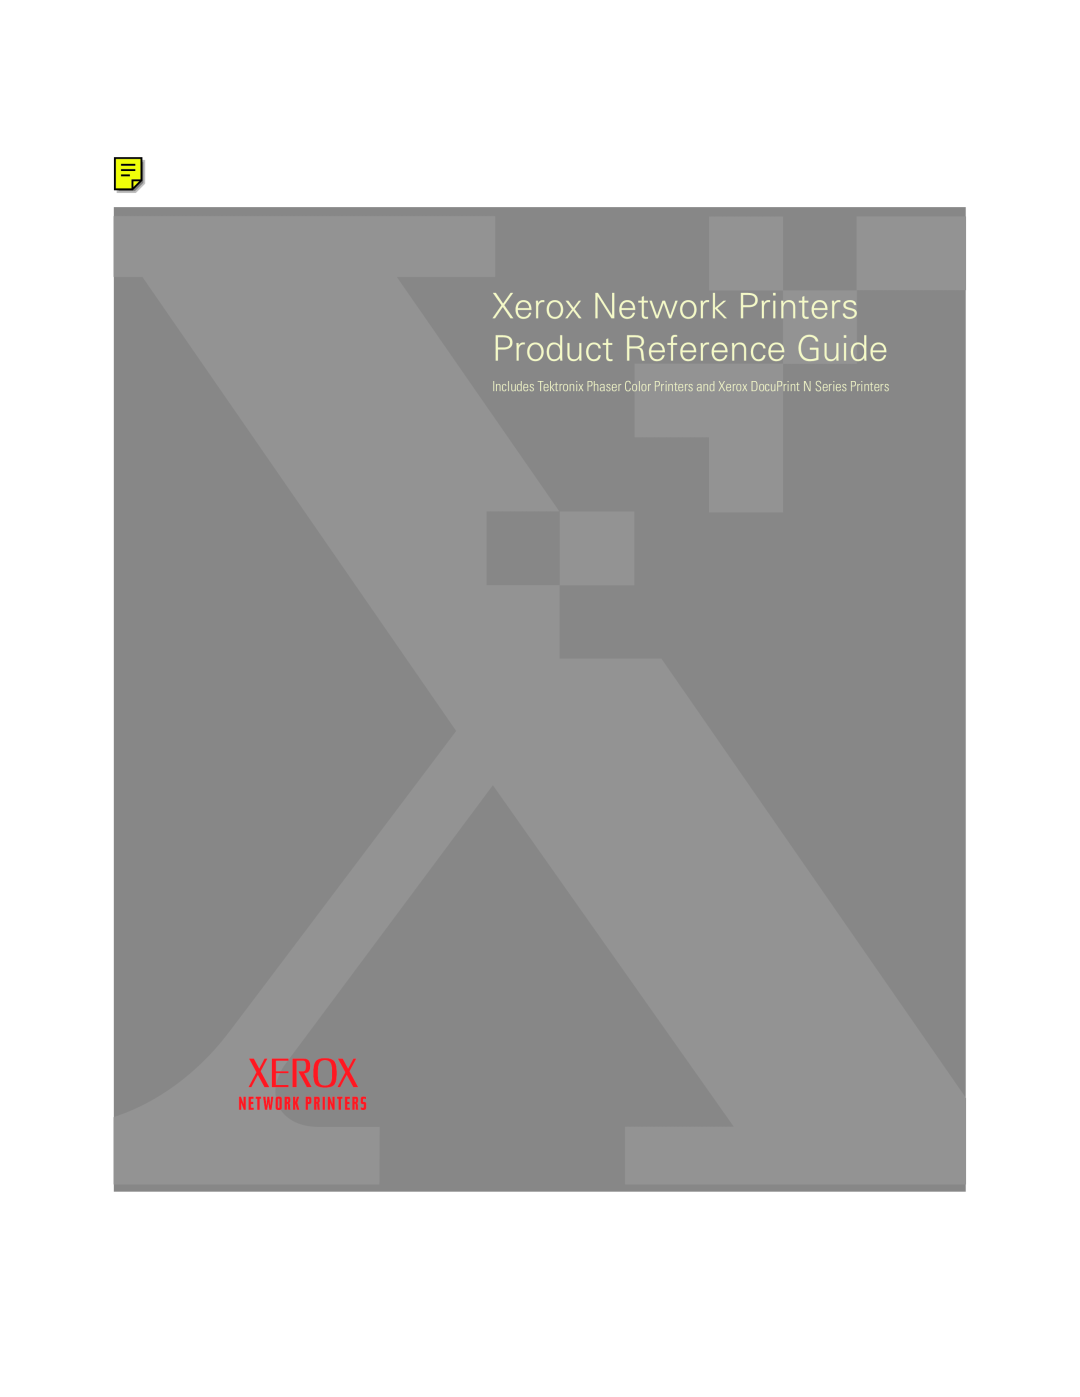 Xerox N Series manual Xerox Network Printers Product Reference Guide 